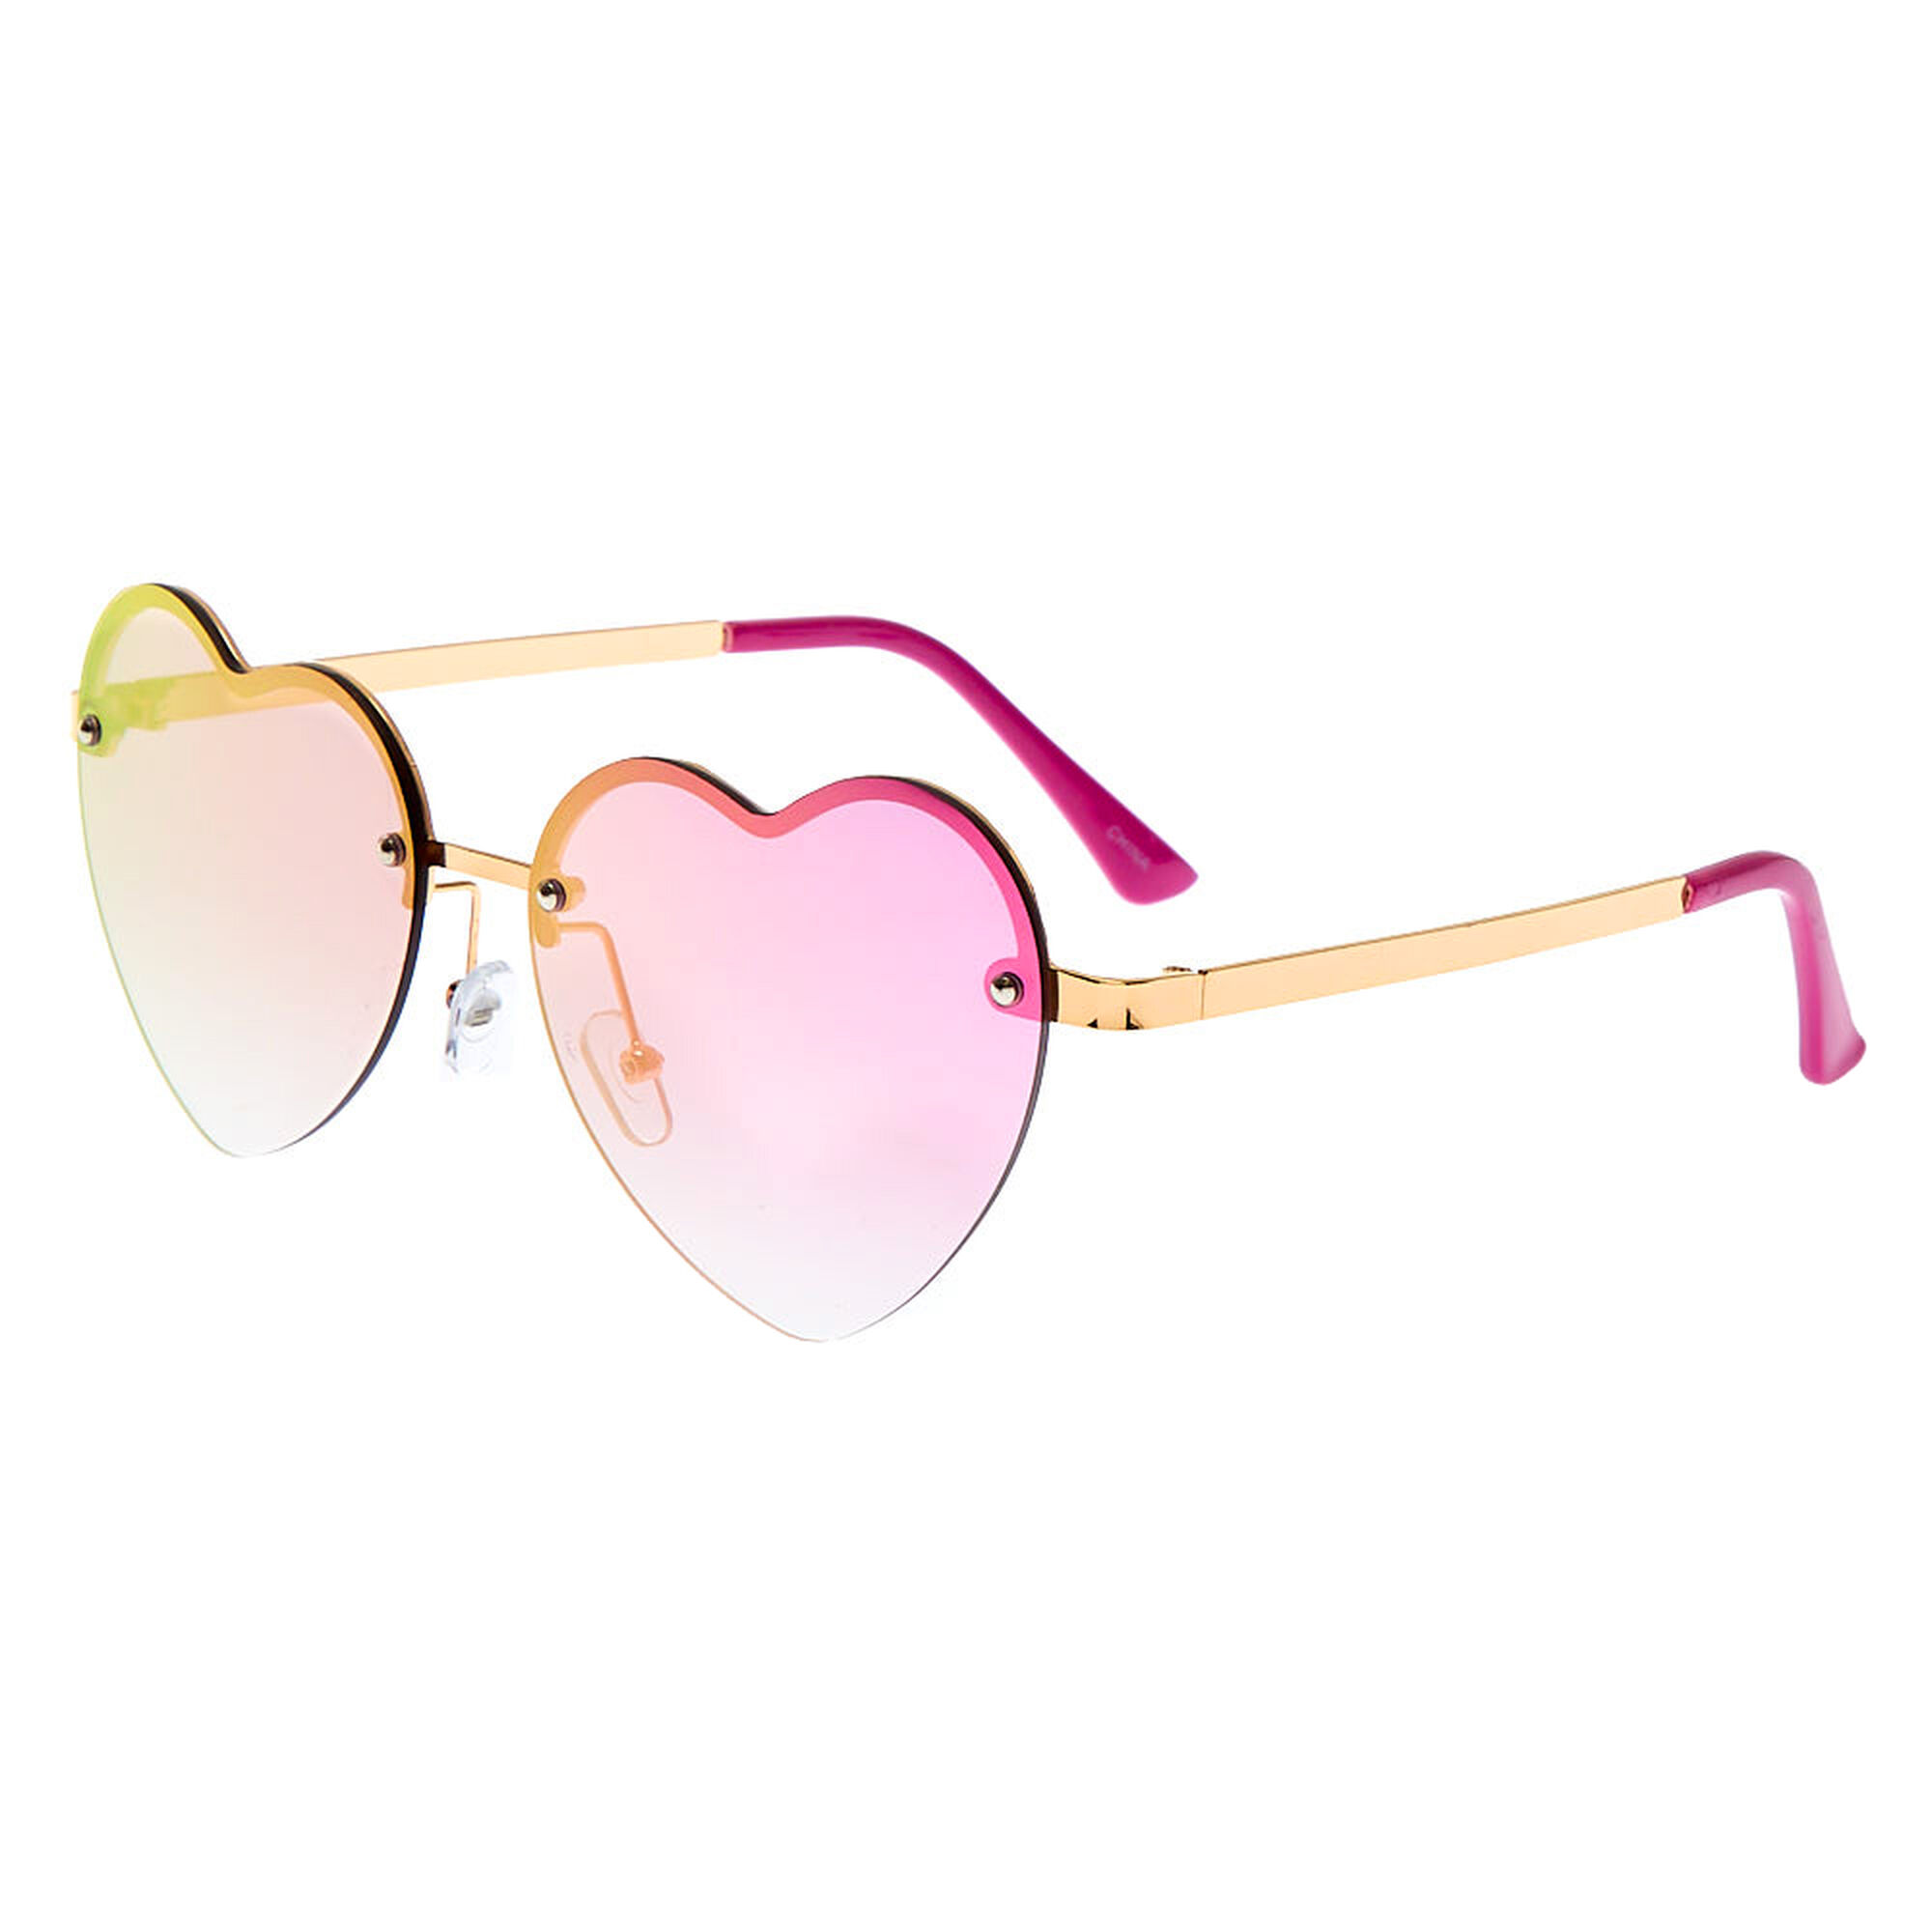 View Claires Rimless Heart Sunglasses Pink information